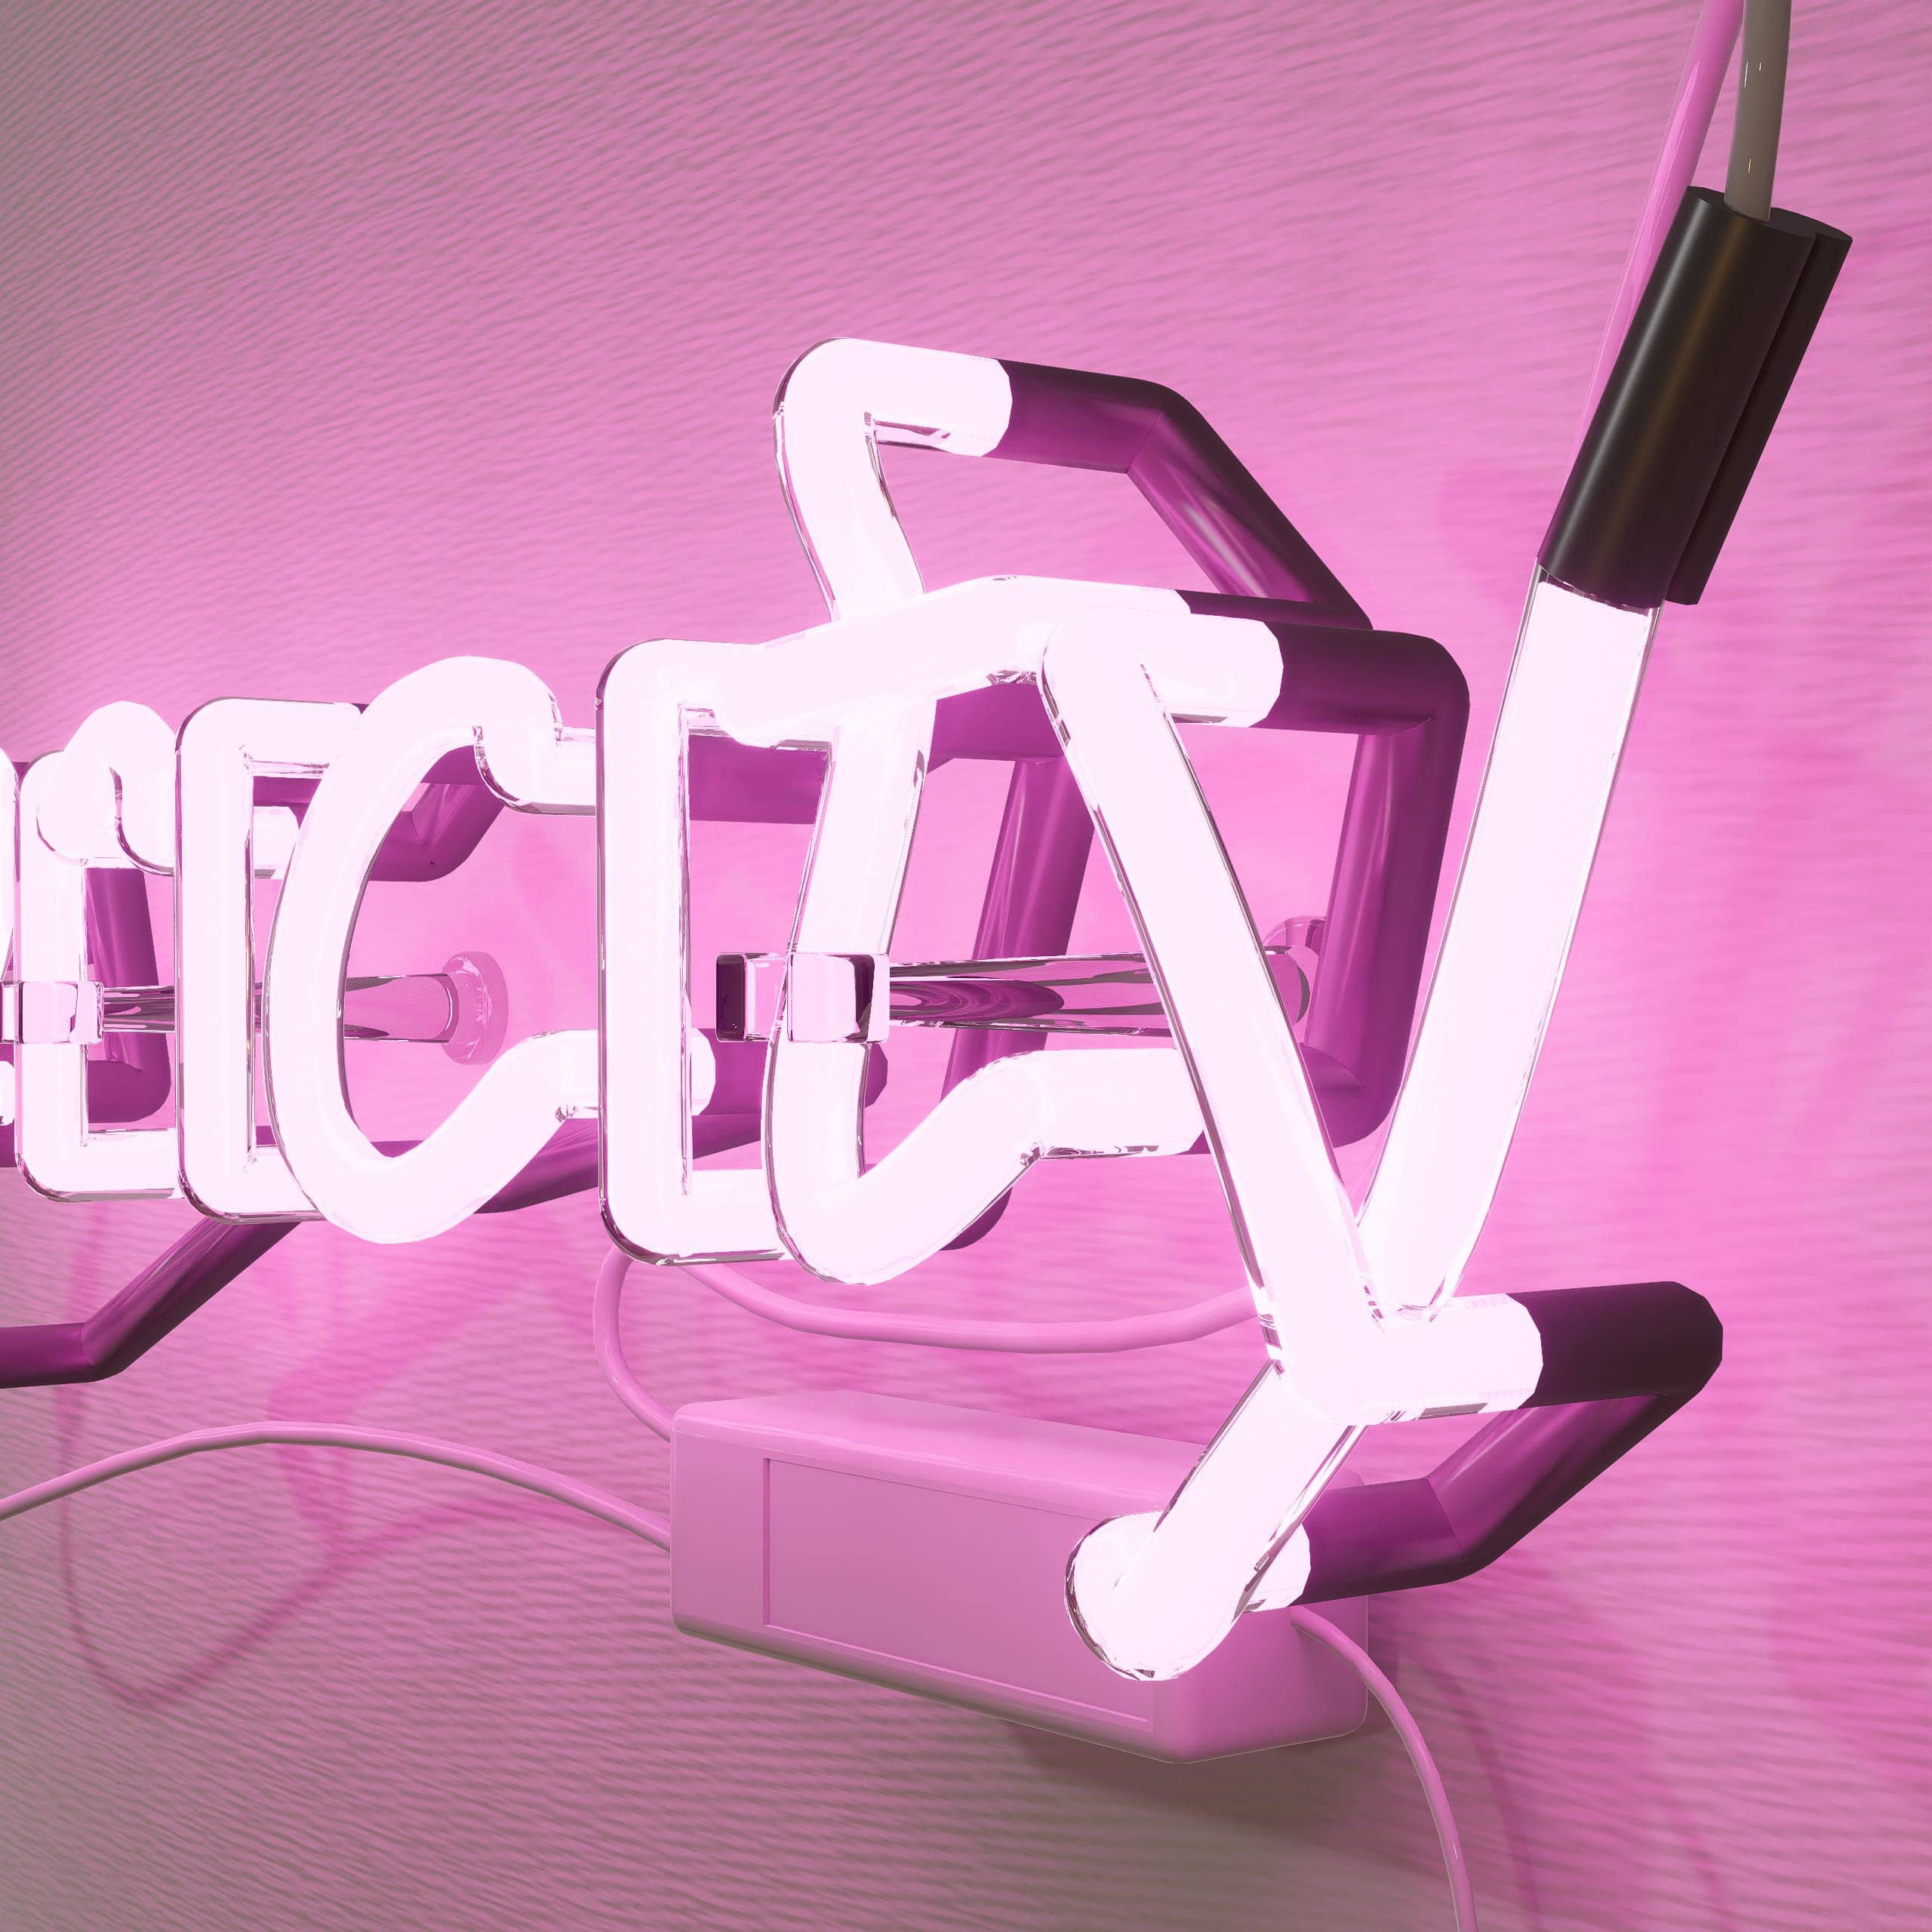 vintage-neon-signs-and-the-magic-of-'apricity'